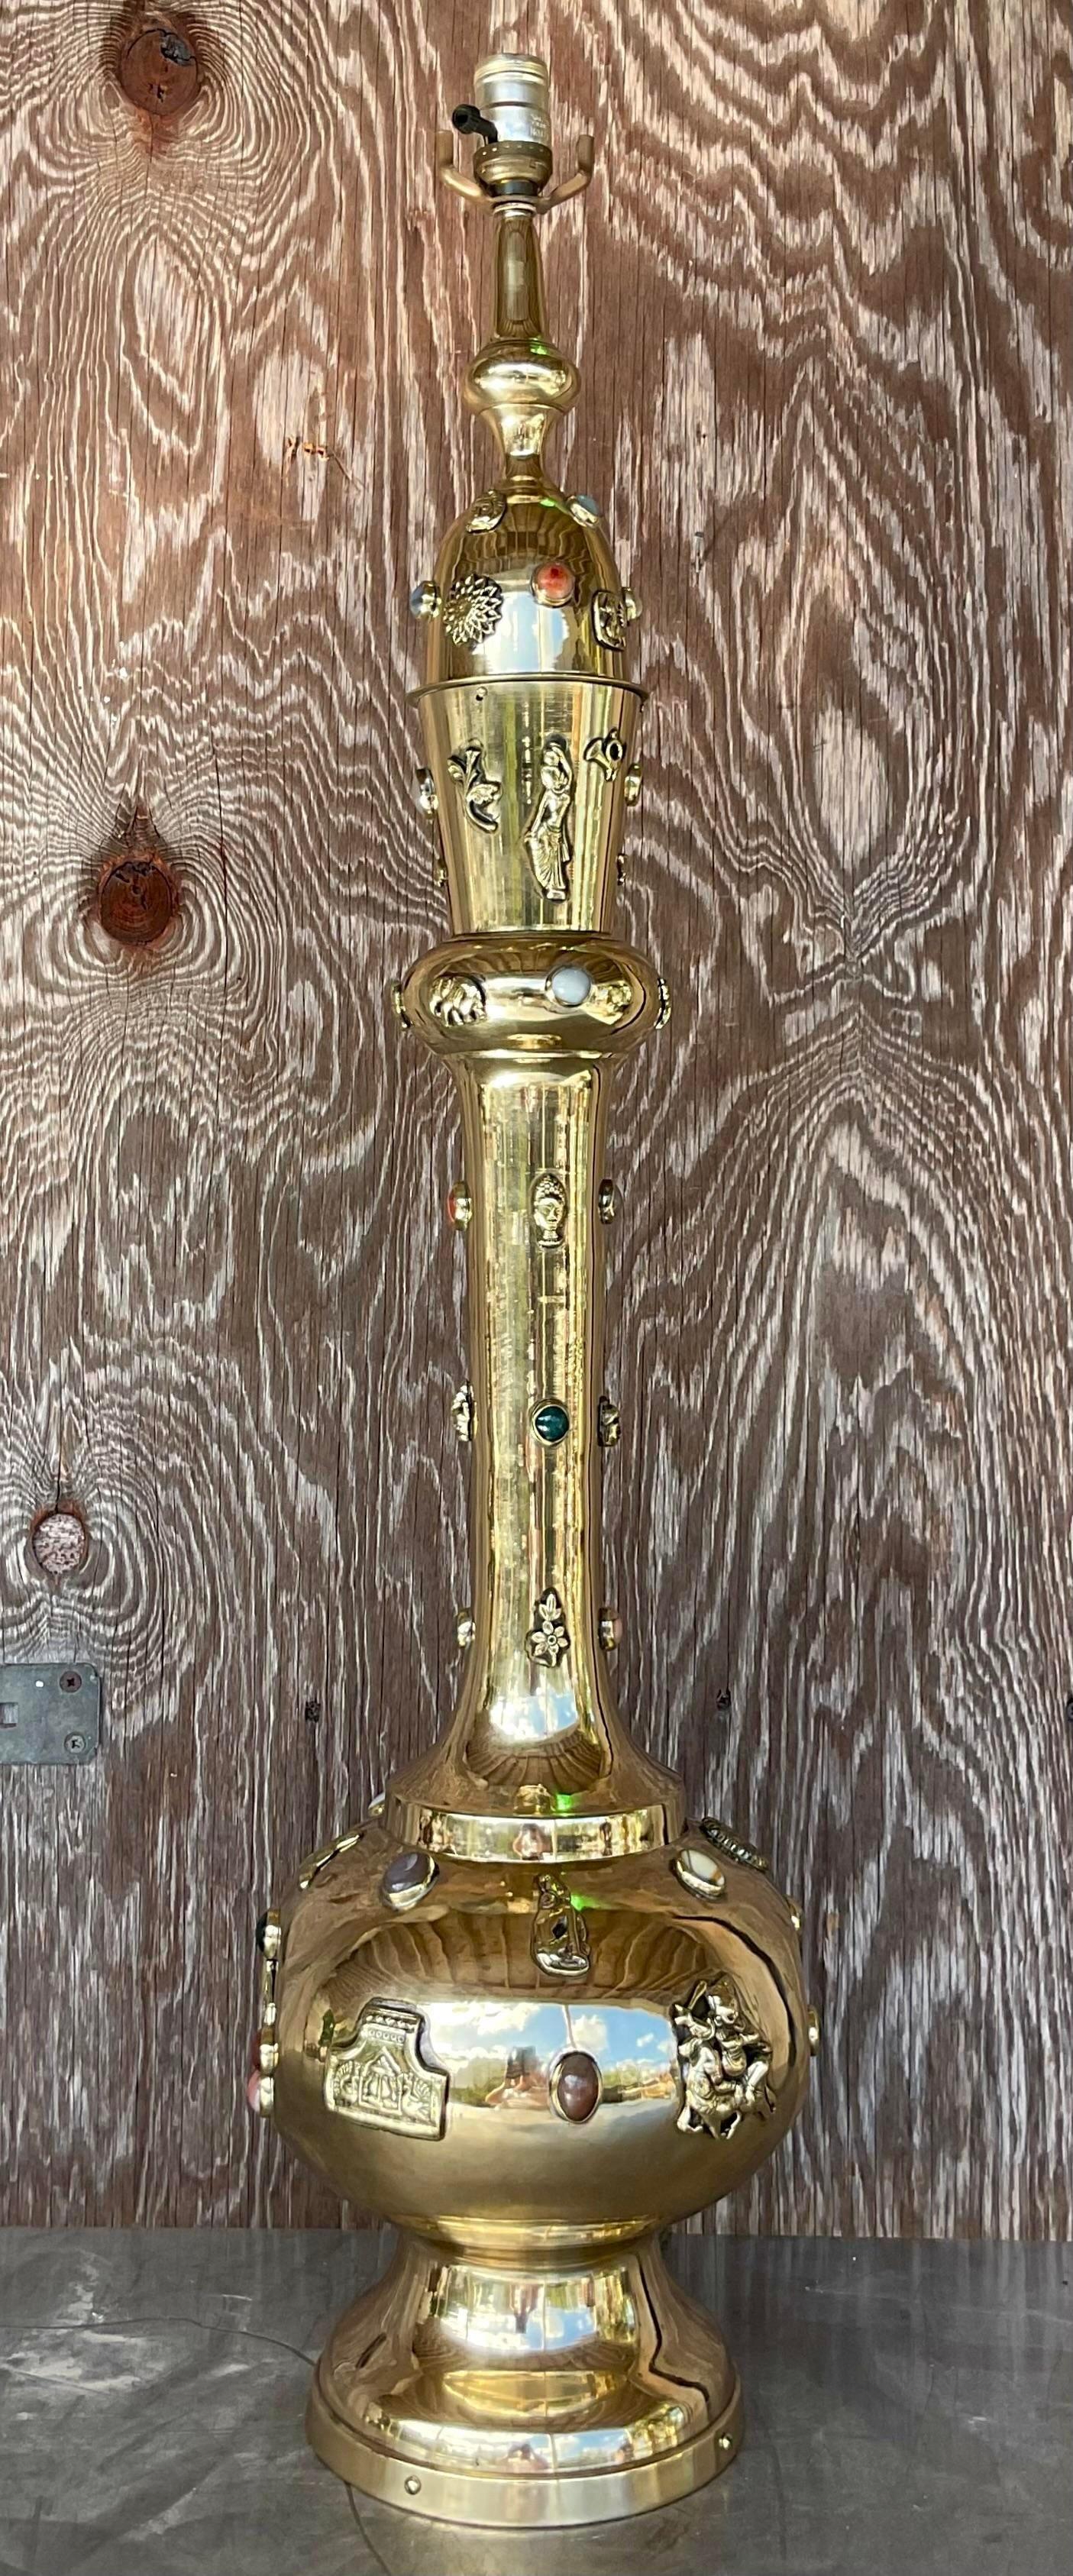 An incredible vintage Boho table lamp. Monumental in size and drama. A chic tall gourd shape with hand hammered details and inset precious stones. Also lights from the inside to really feature the different colored stones. Freshly polished. Acquired